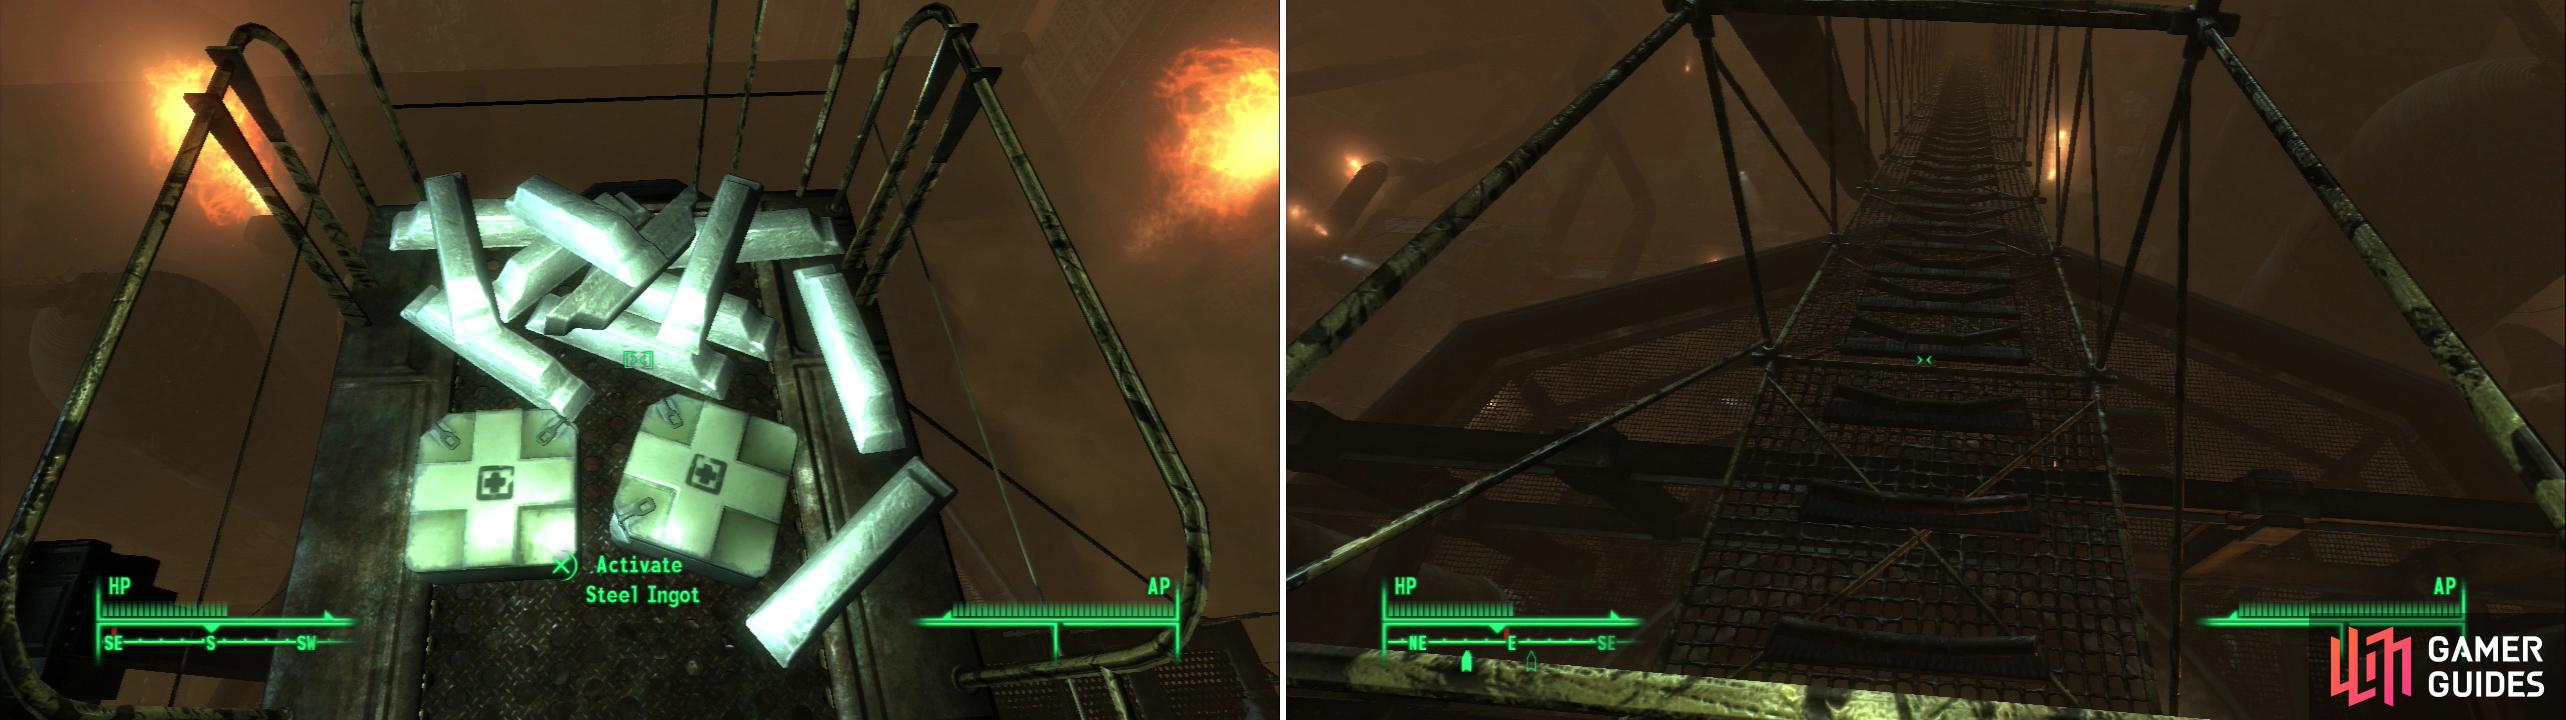 Reach the highest extant part of the Steelyard to score a whopping twelve Steel Ingots (left). Once you’re done looting, climb down a ramp to score even more ingoty goodness (right).